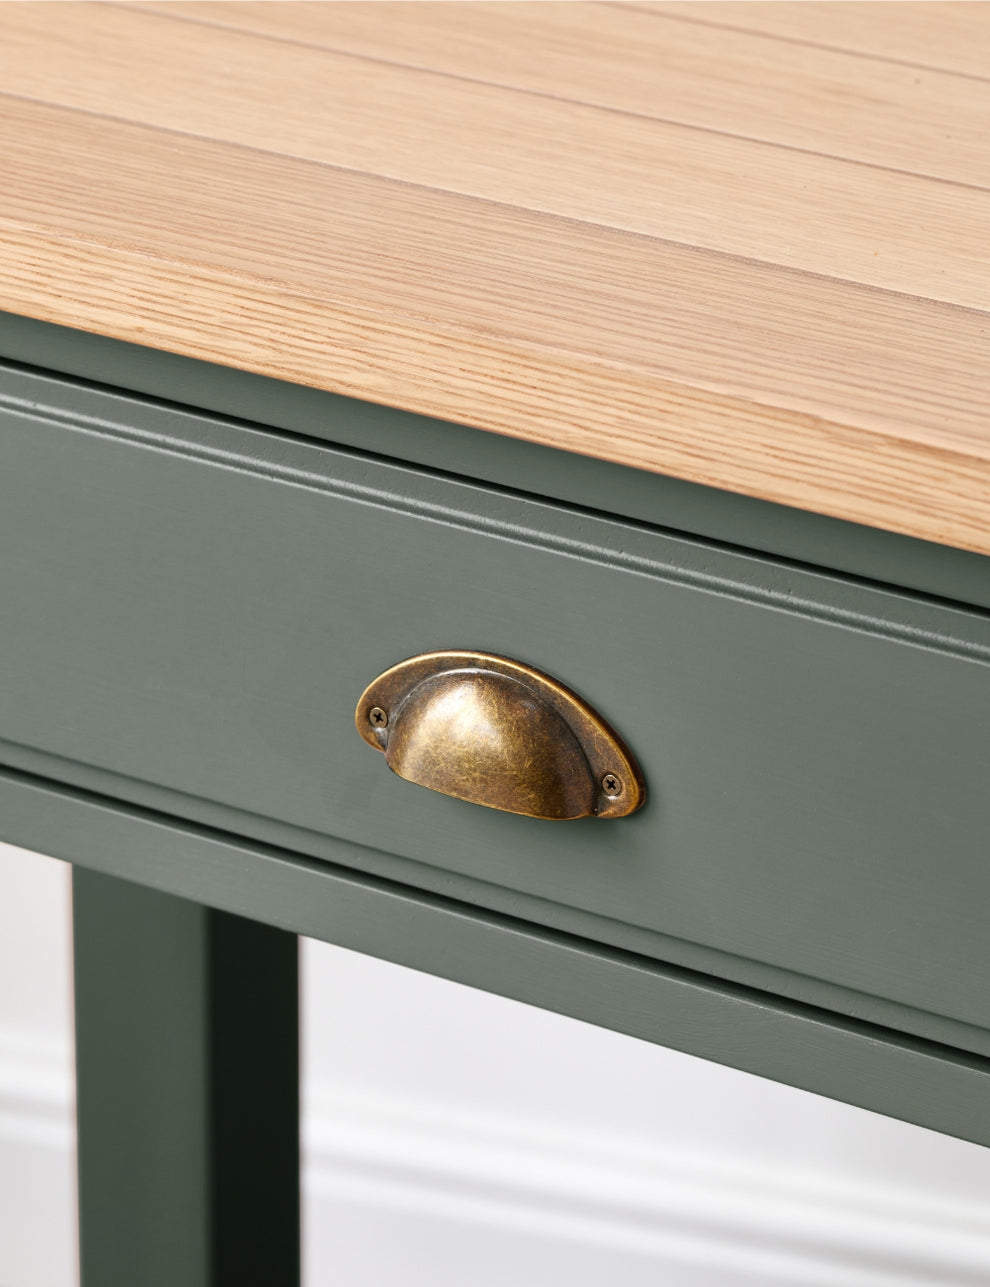 Earthy Green Oak Console Table with Drawers